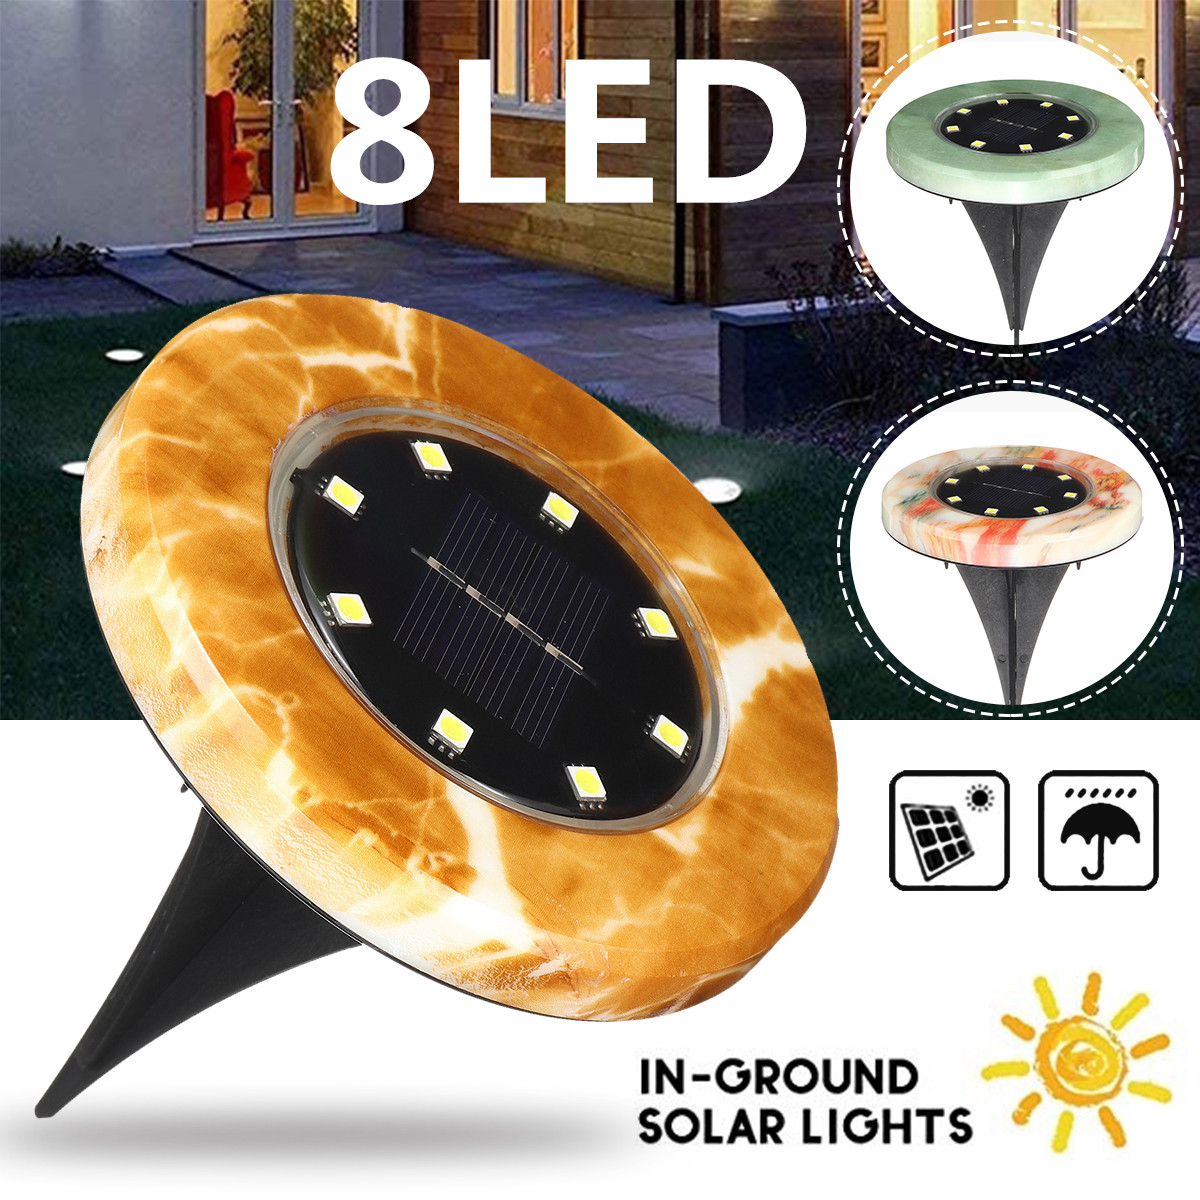 8-LED-Outdoor-Solar-Buried-Light-Marble-Waterproof-Ground-Path-Garden-Yard-Lamp-1624778-1